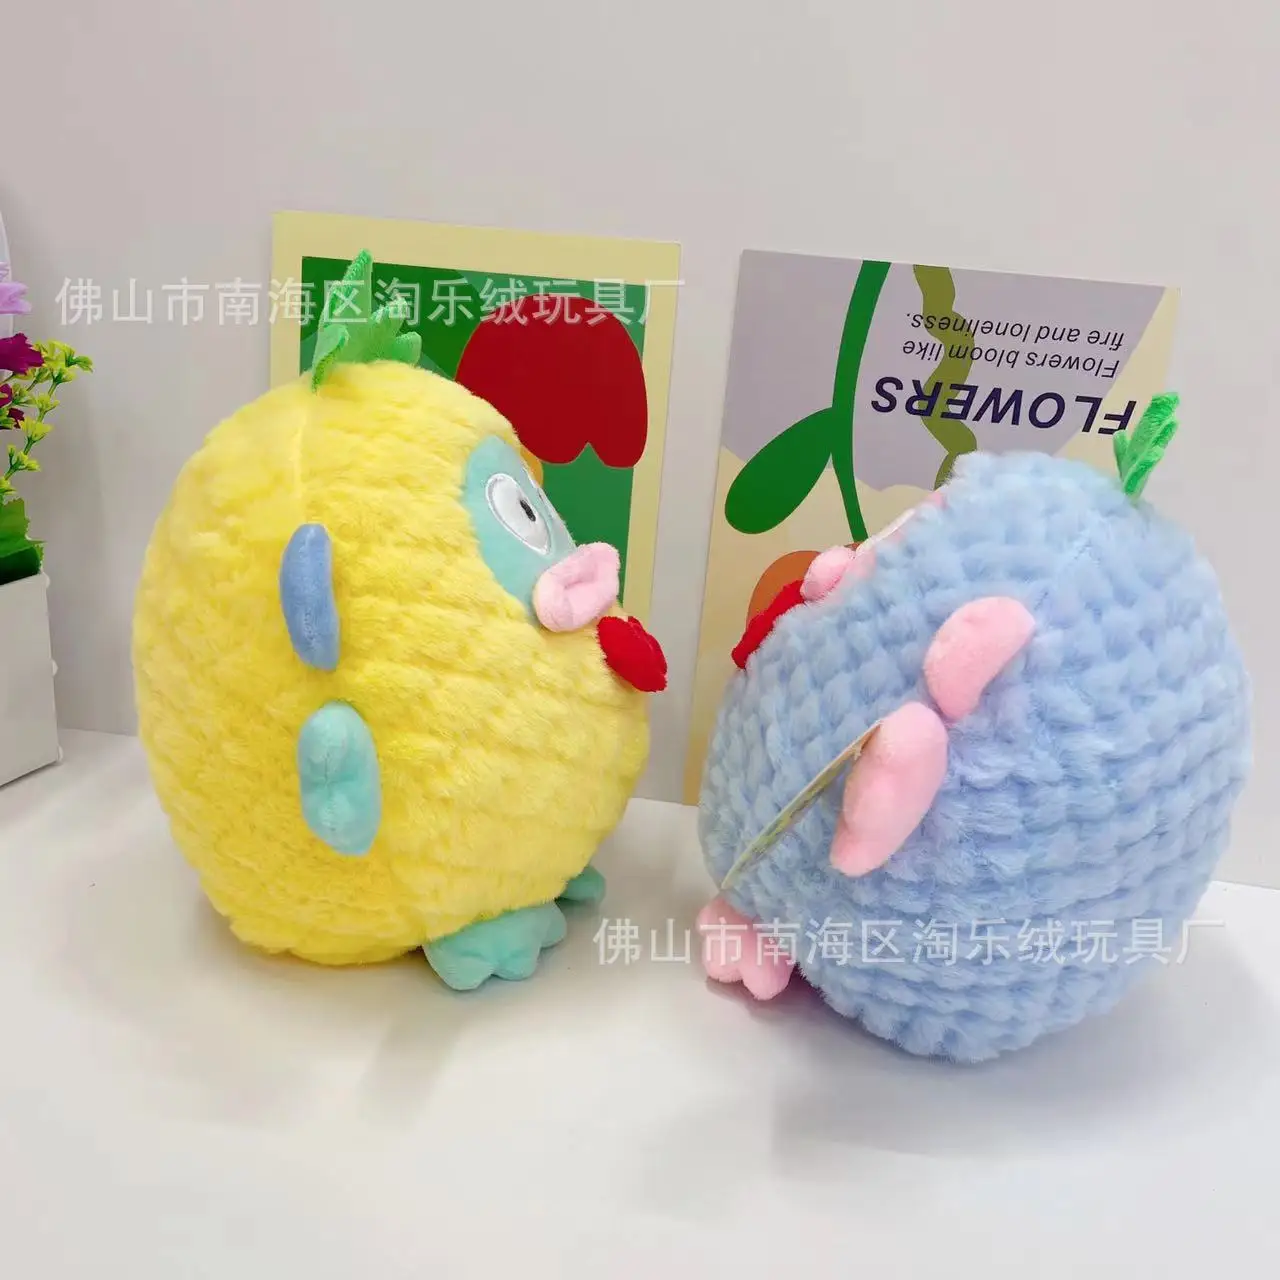 New Arrival Stuffed Animal Super Cute Japanese Cartoon 8 inch Pineapple Ugly Fish Plush Doll Grab Doll for Girls